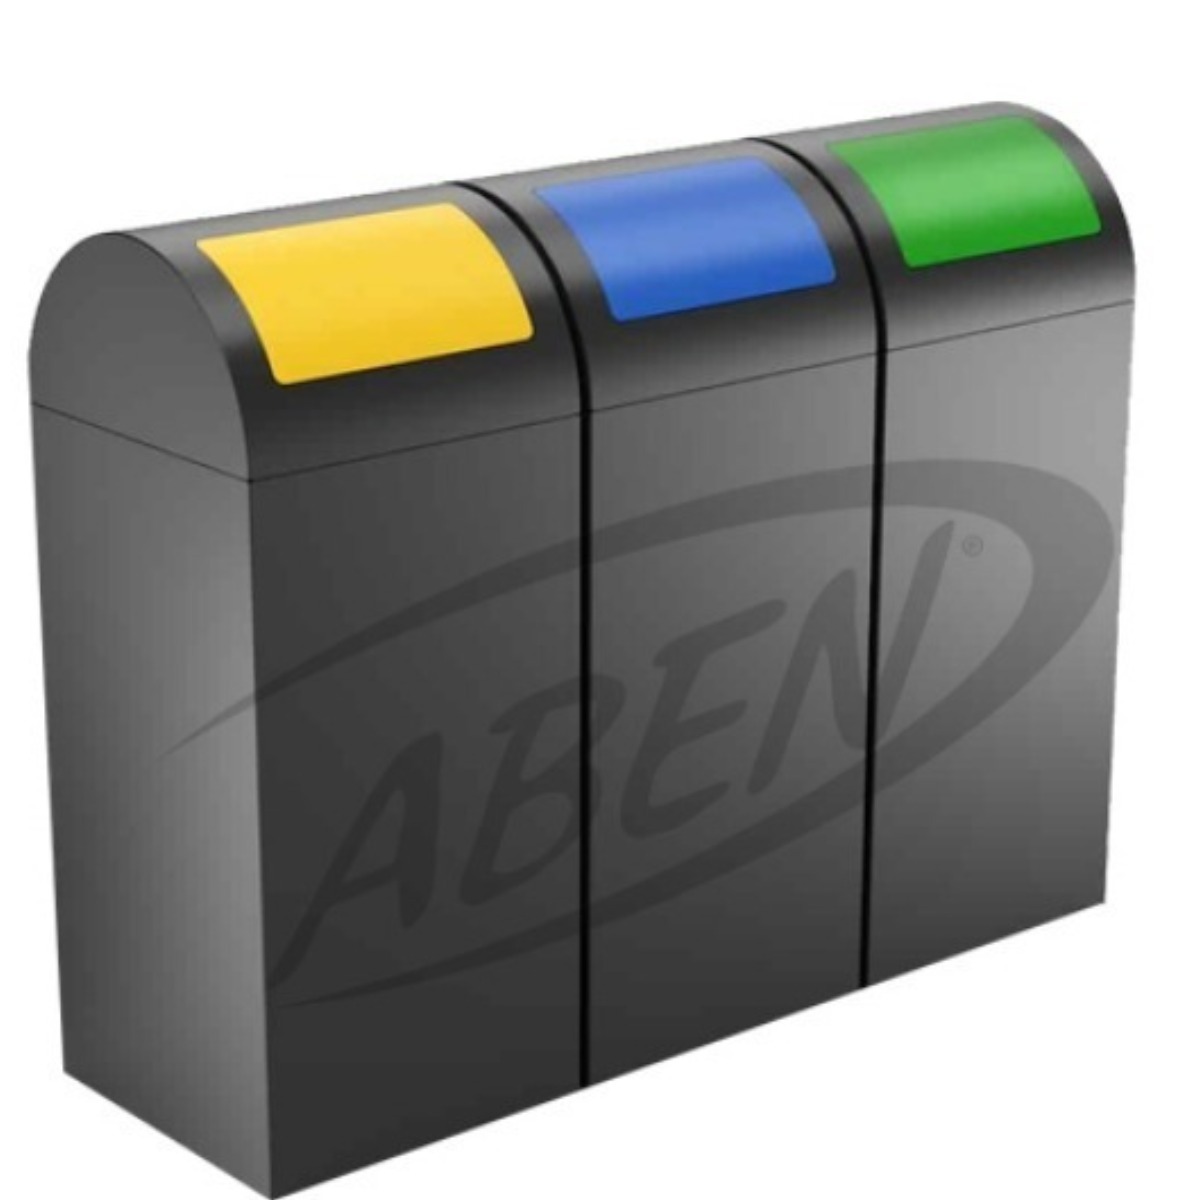 AB-762 3’Part Recycle Bin